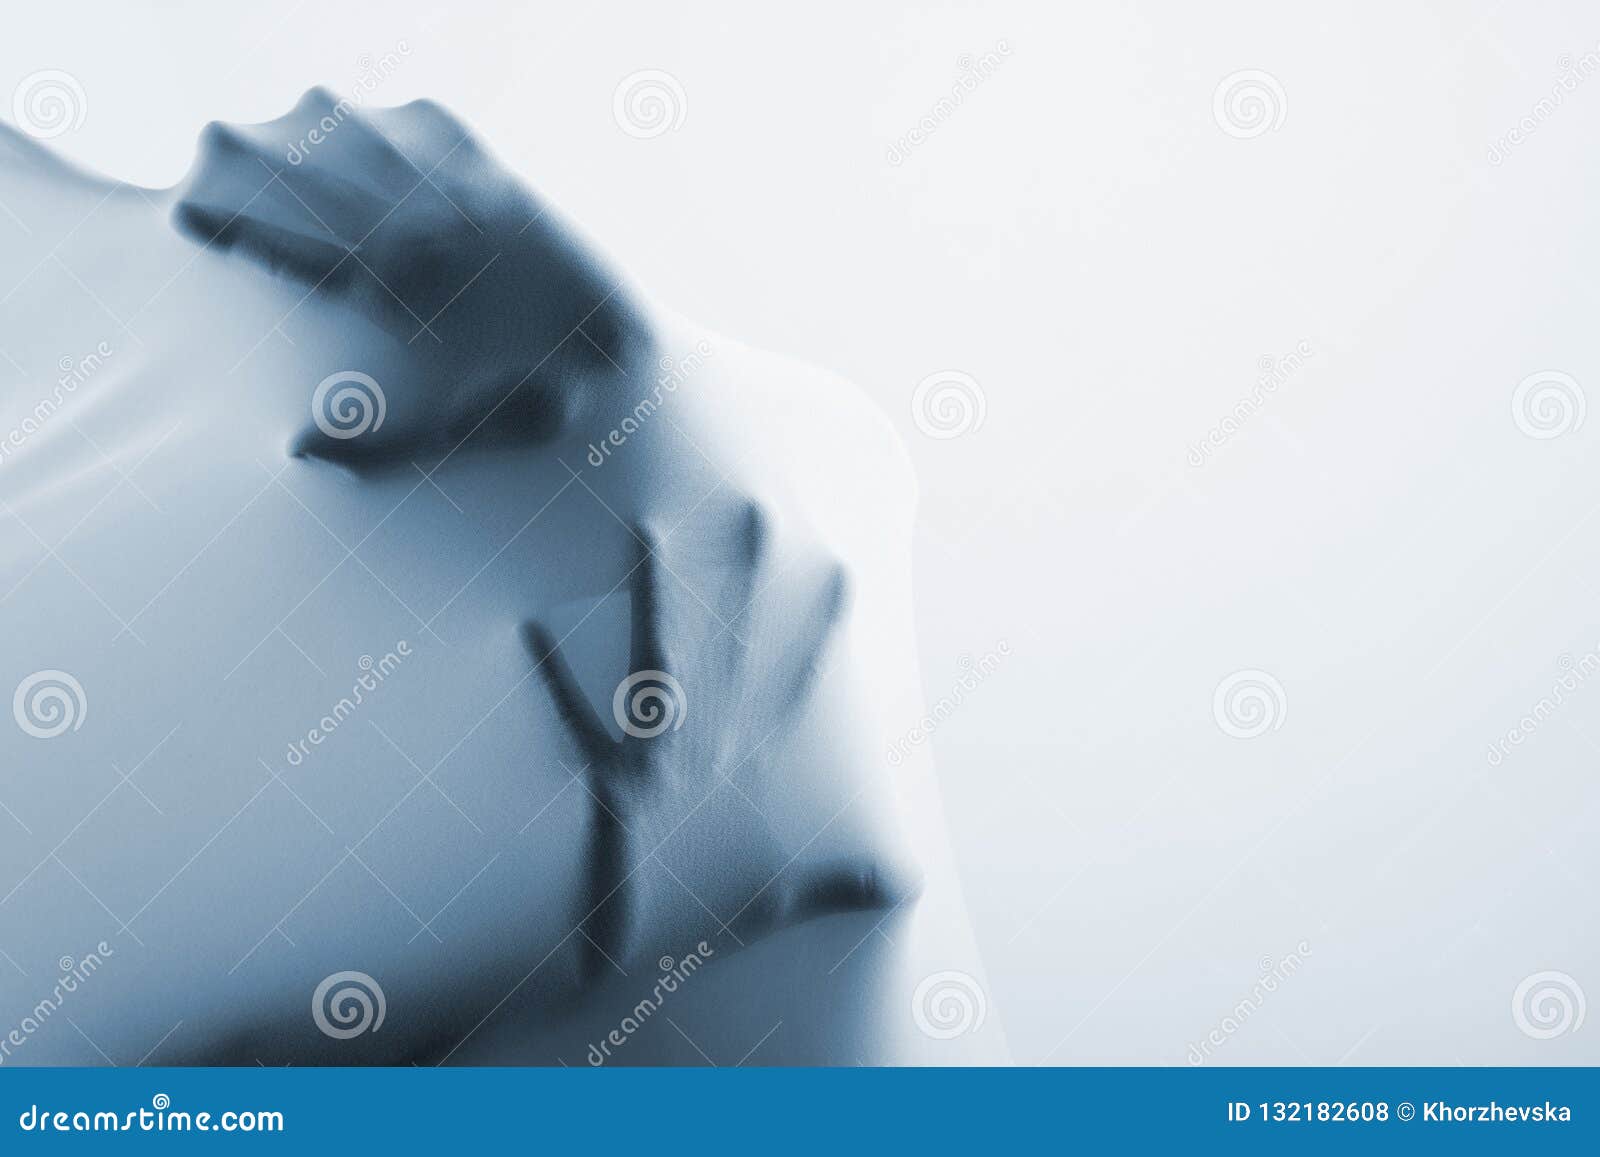 abstract hands, human arm inside fabric